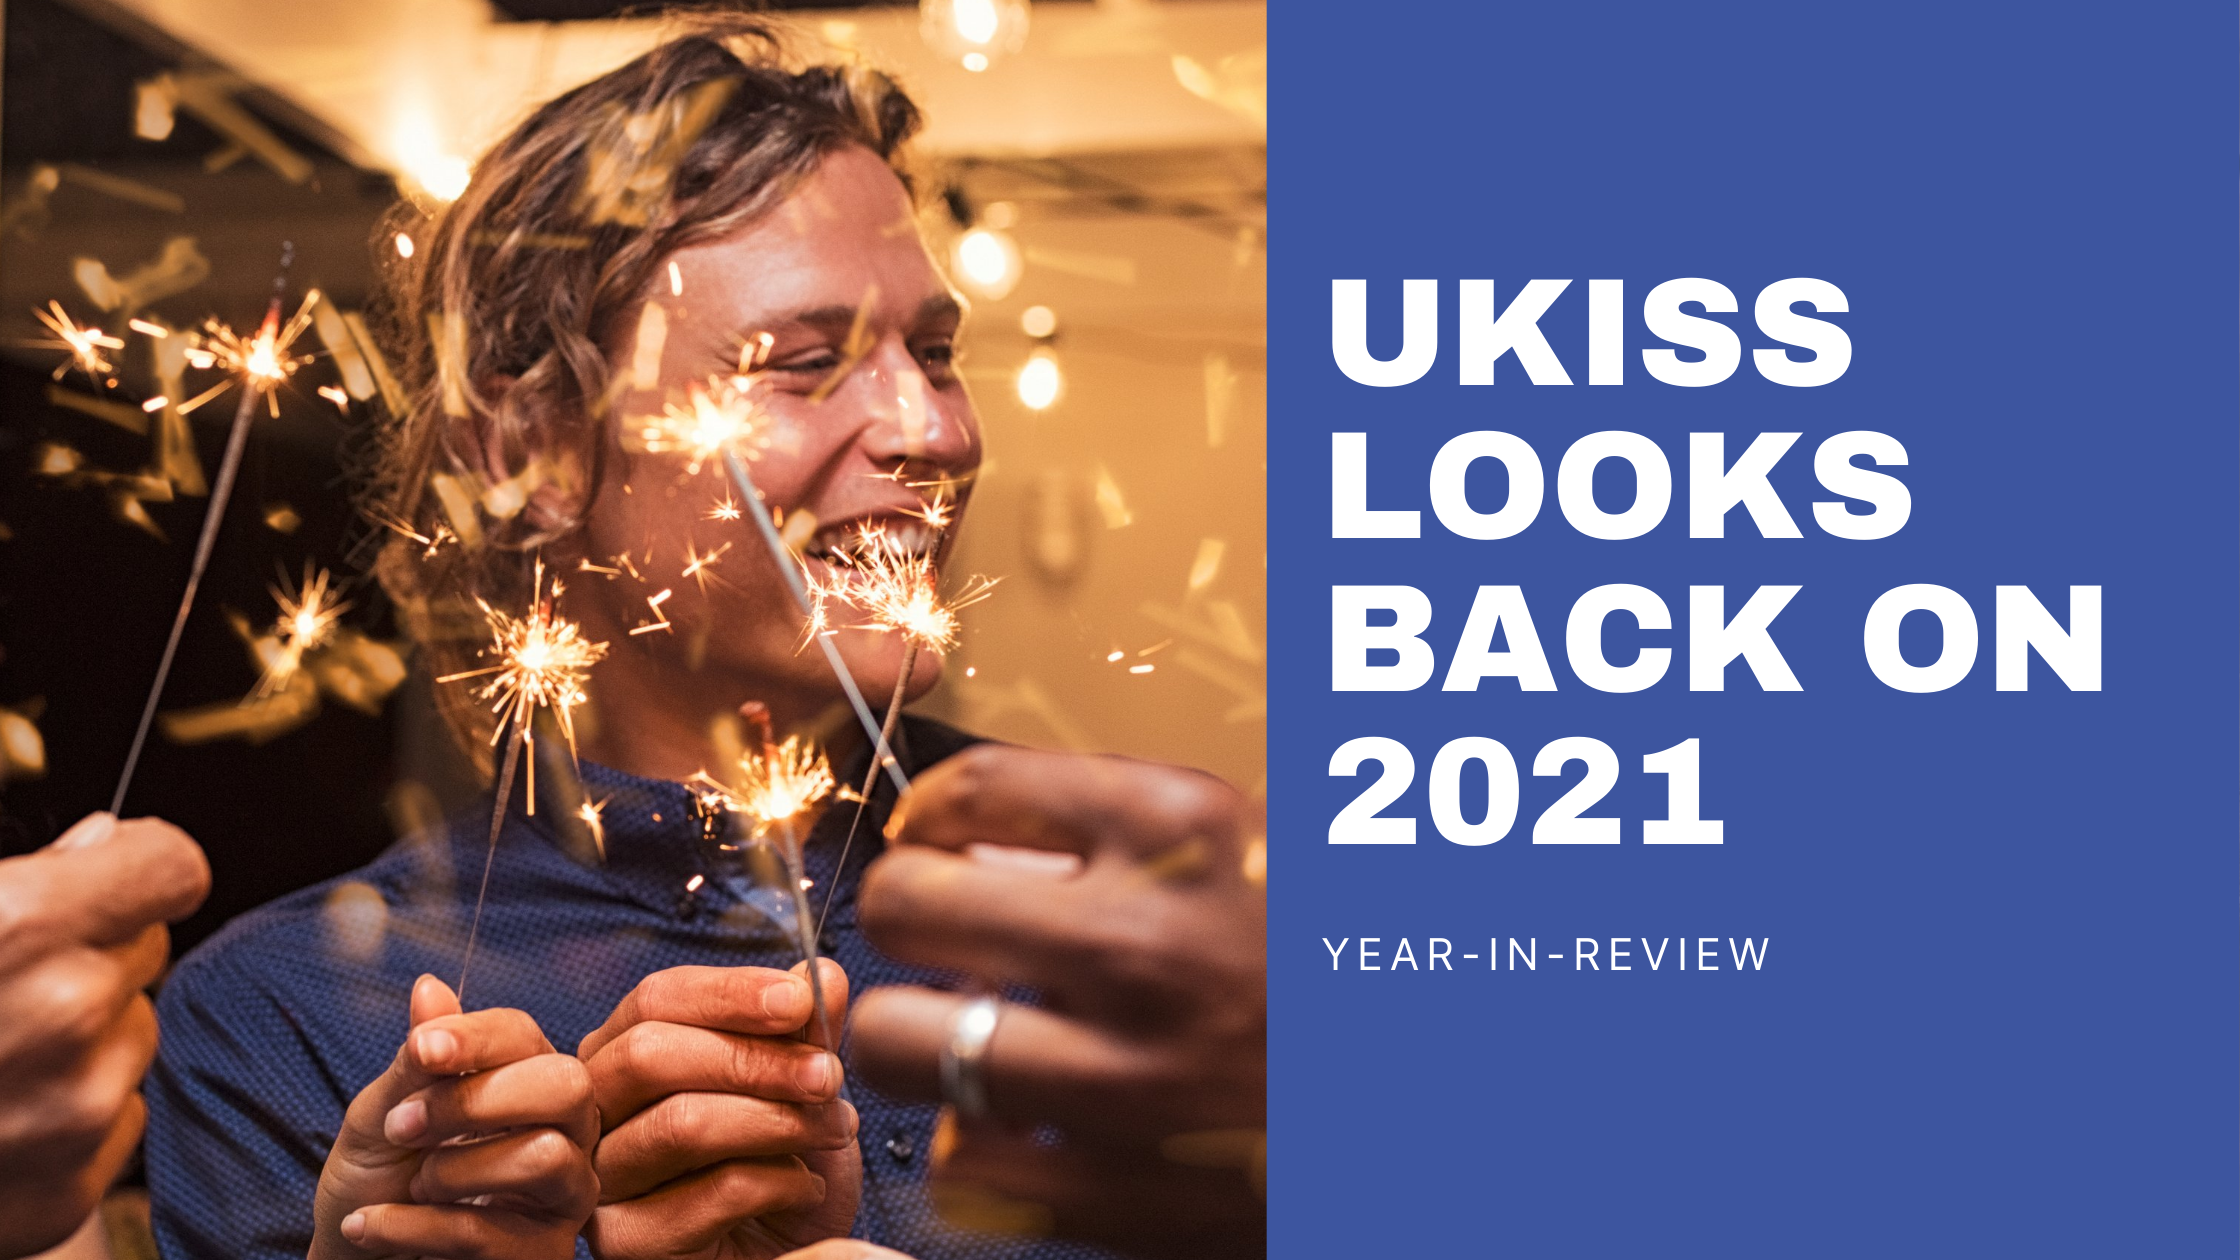 UKISS Tech's 2021 Year-In-Review